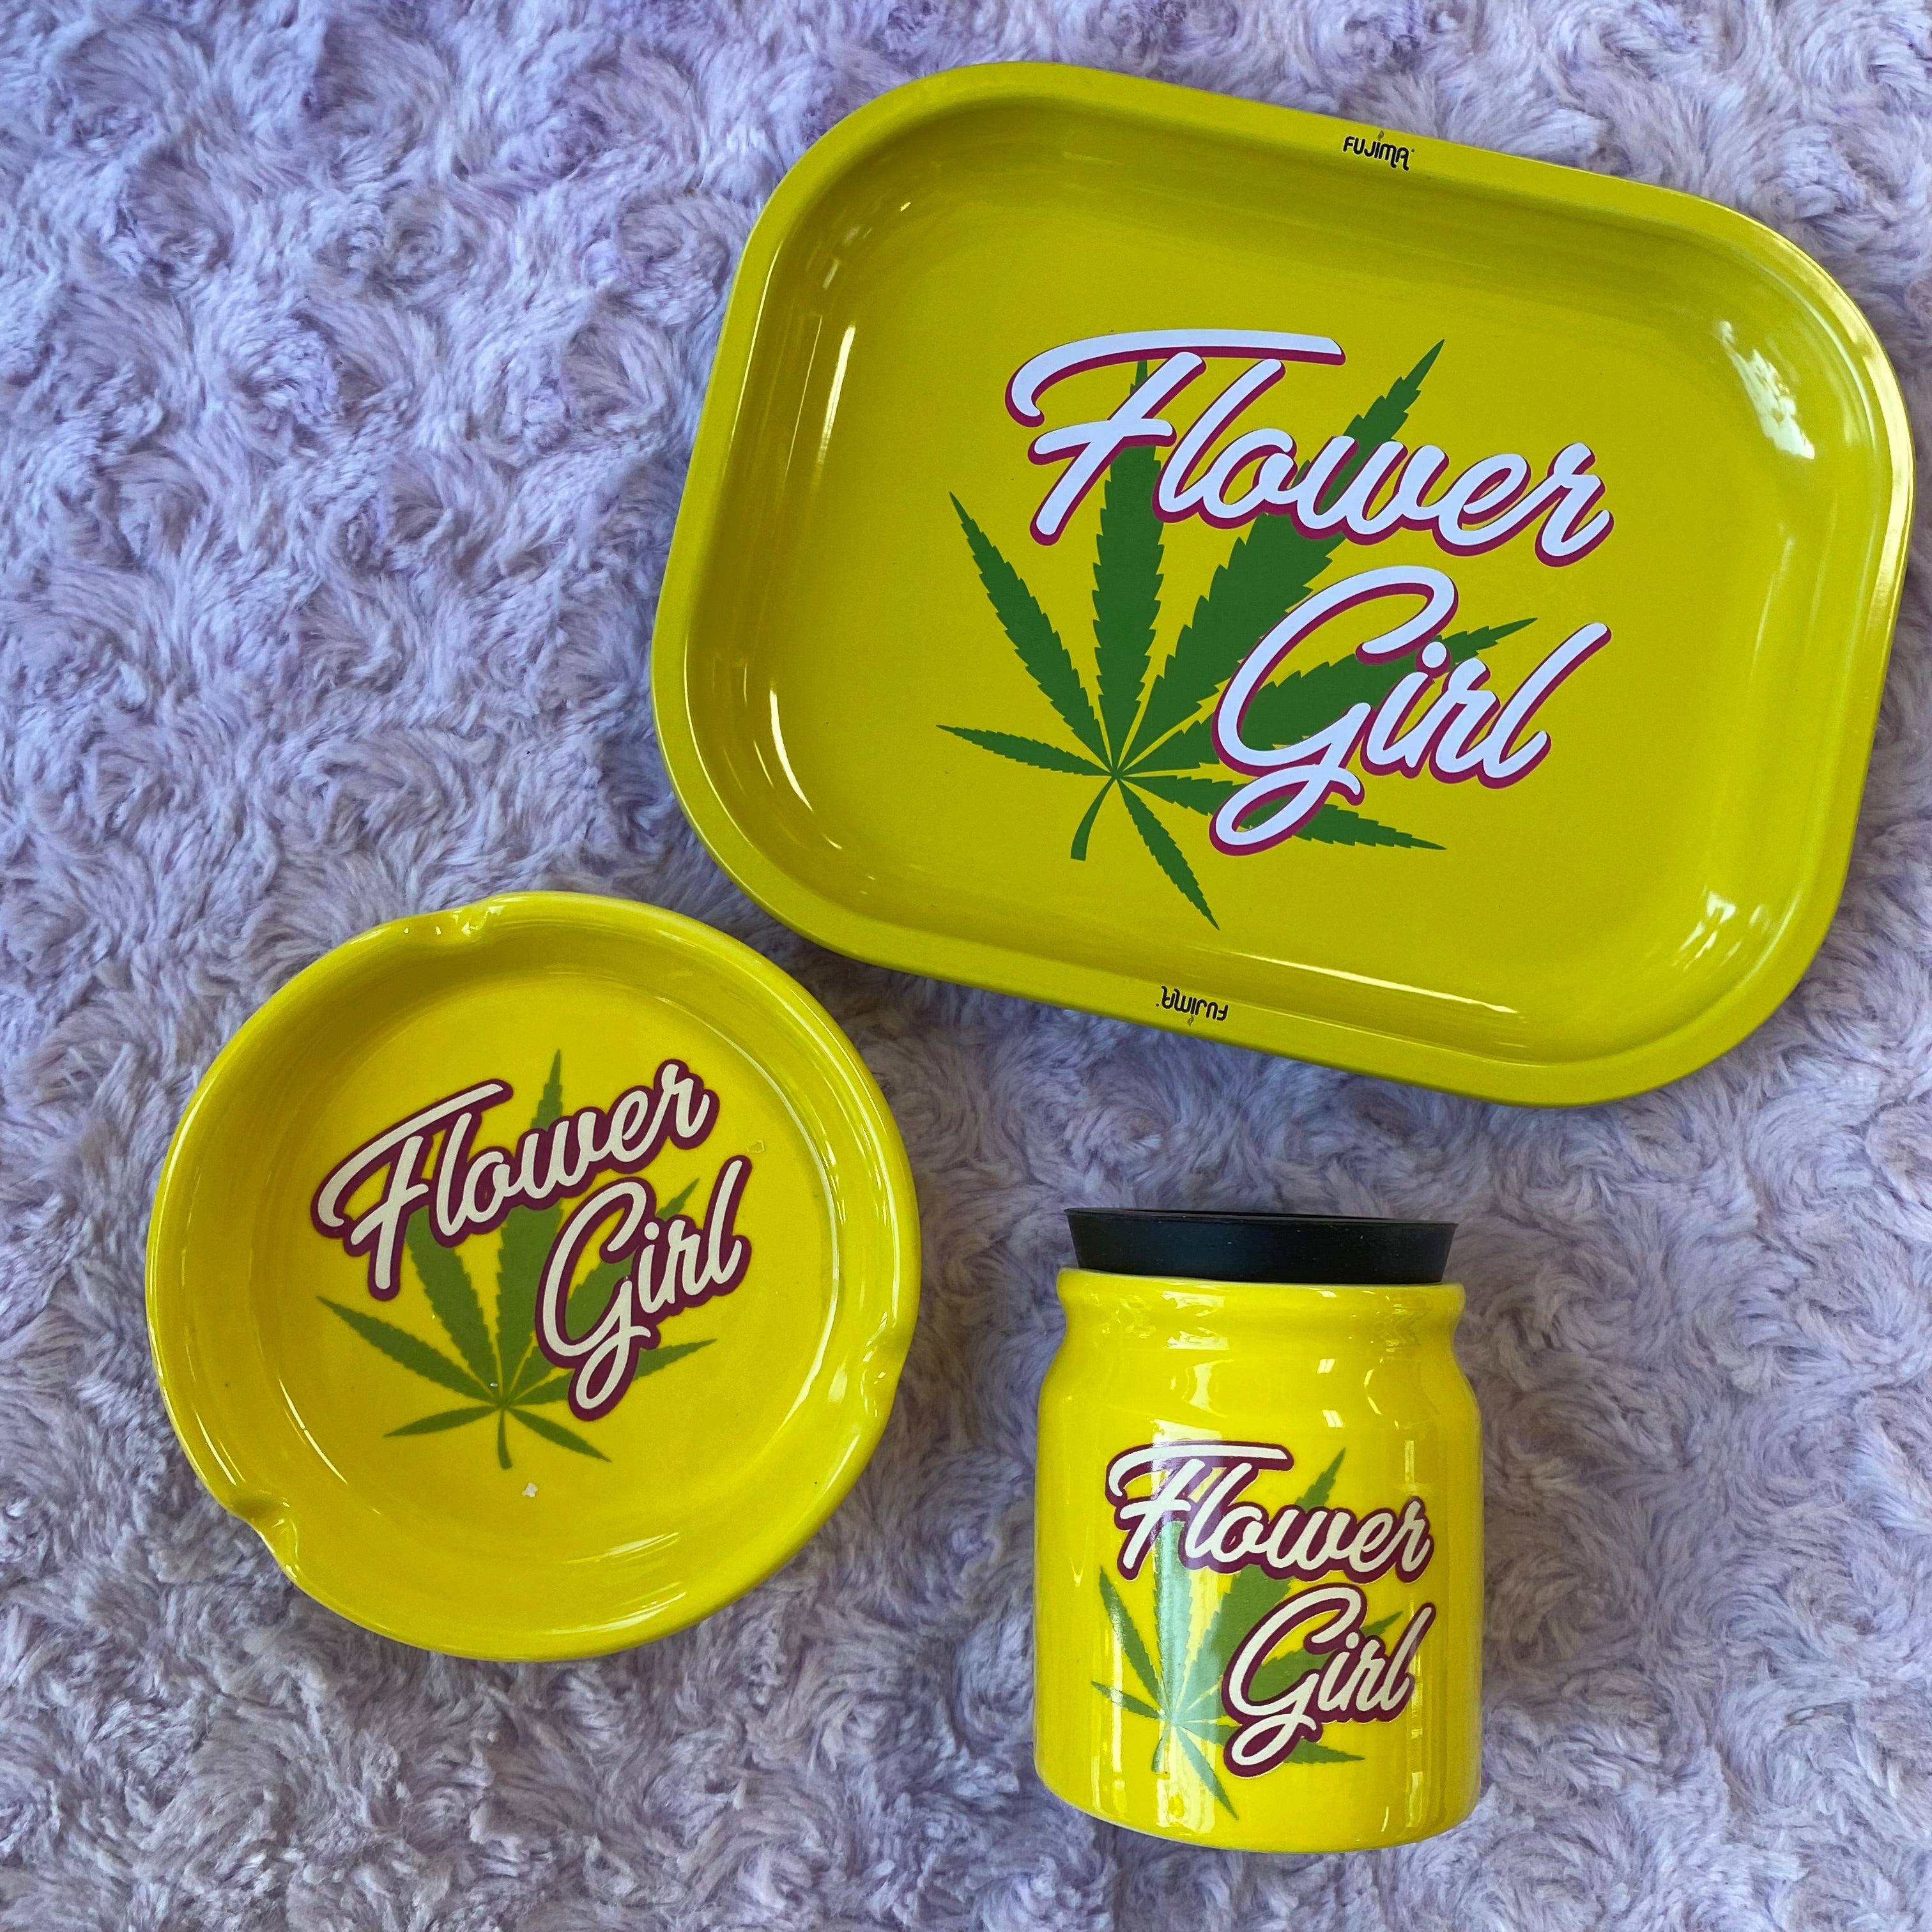  Glow in the Dark Ashtray and Rolling Tray Combo - Perfect Sized  Ashtray and Rolling Tray with Replaceable & Detachable Cleaner Heads for  Easy Storage & Travel : Home & Kitchen